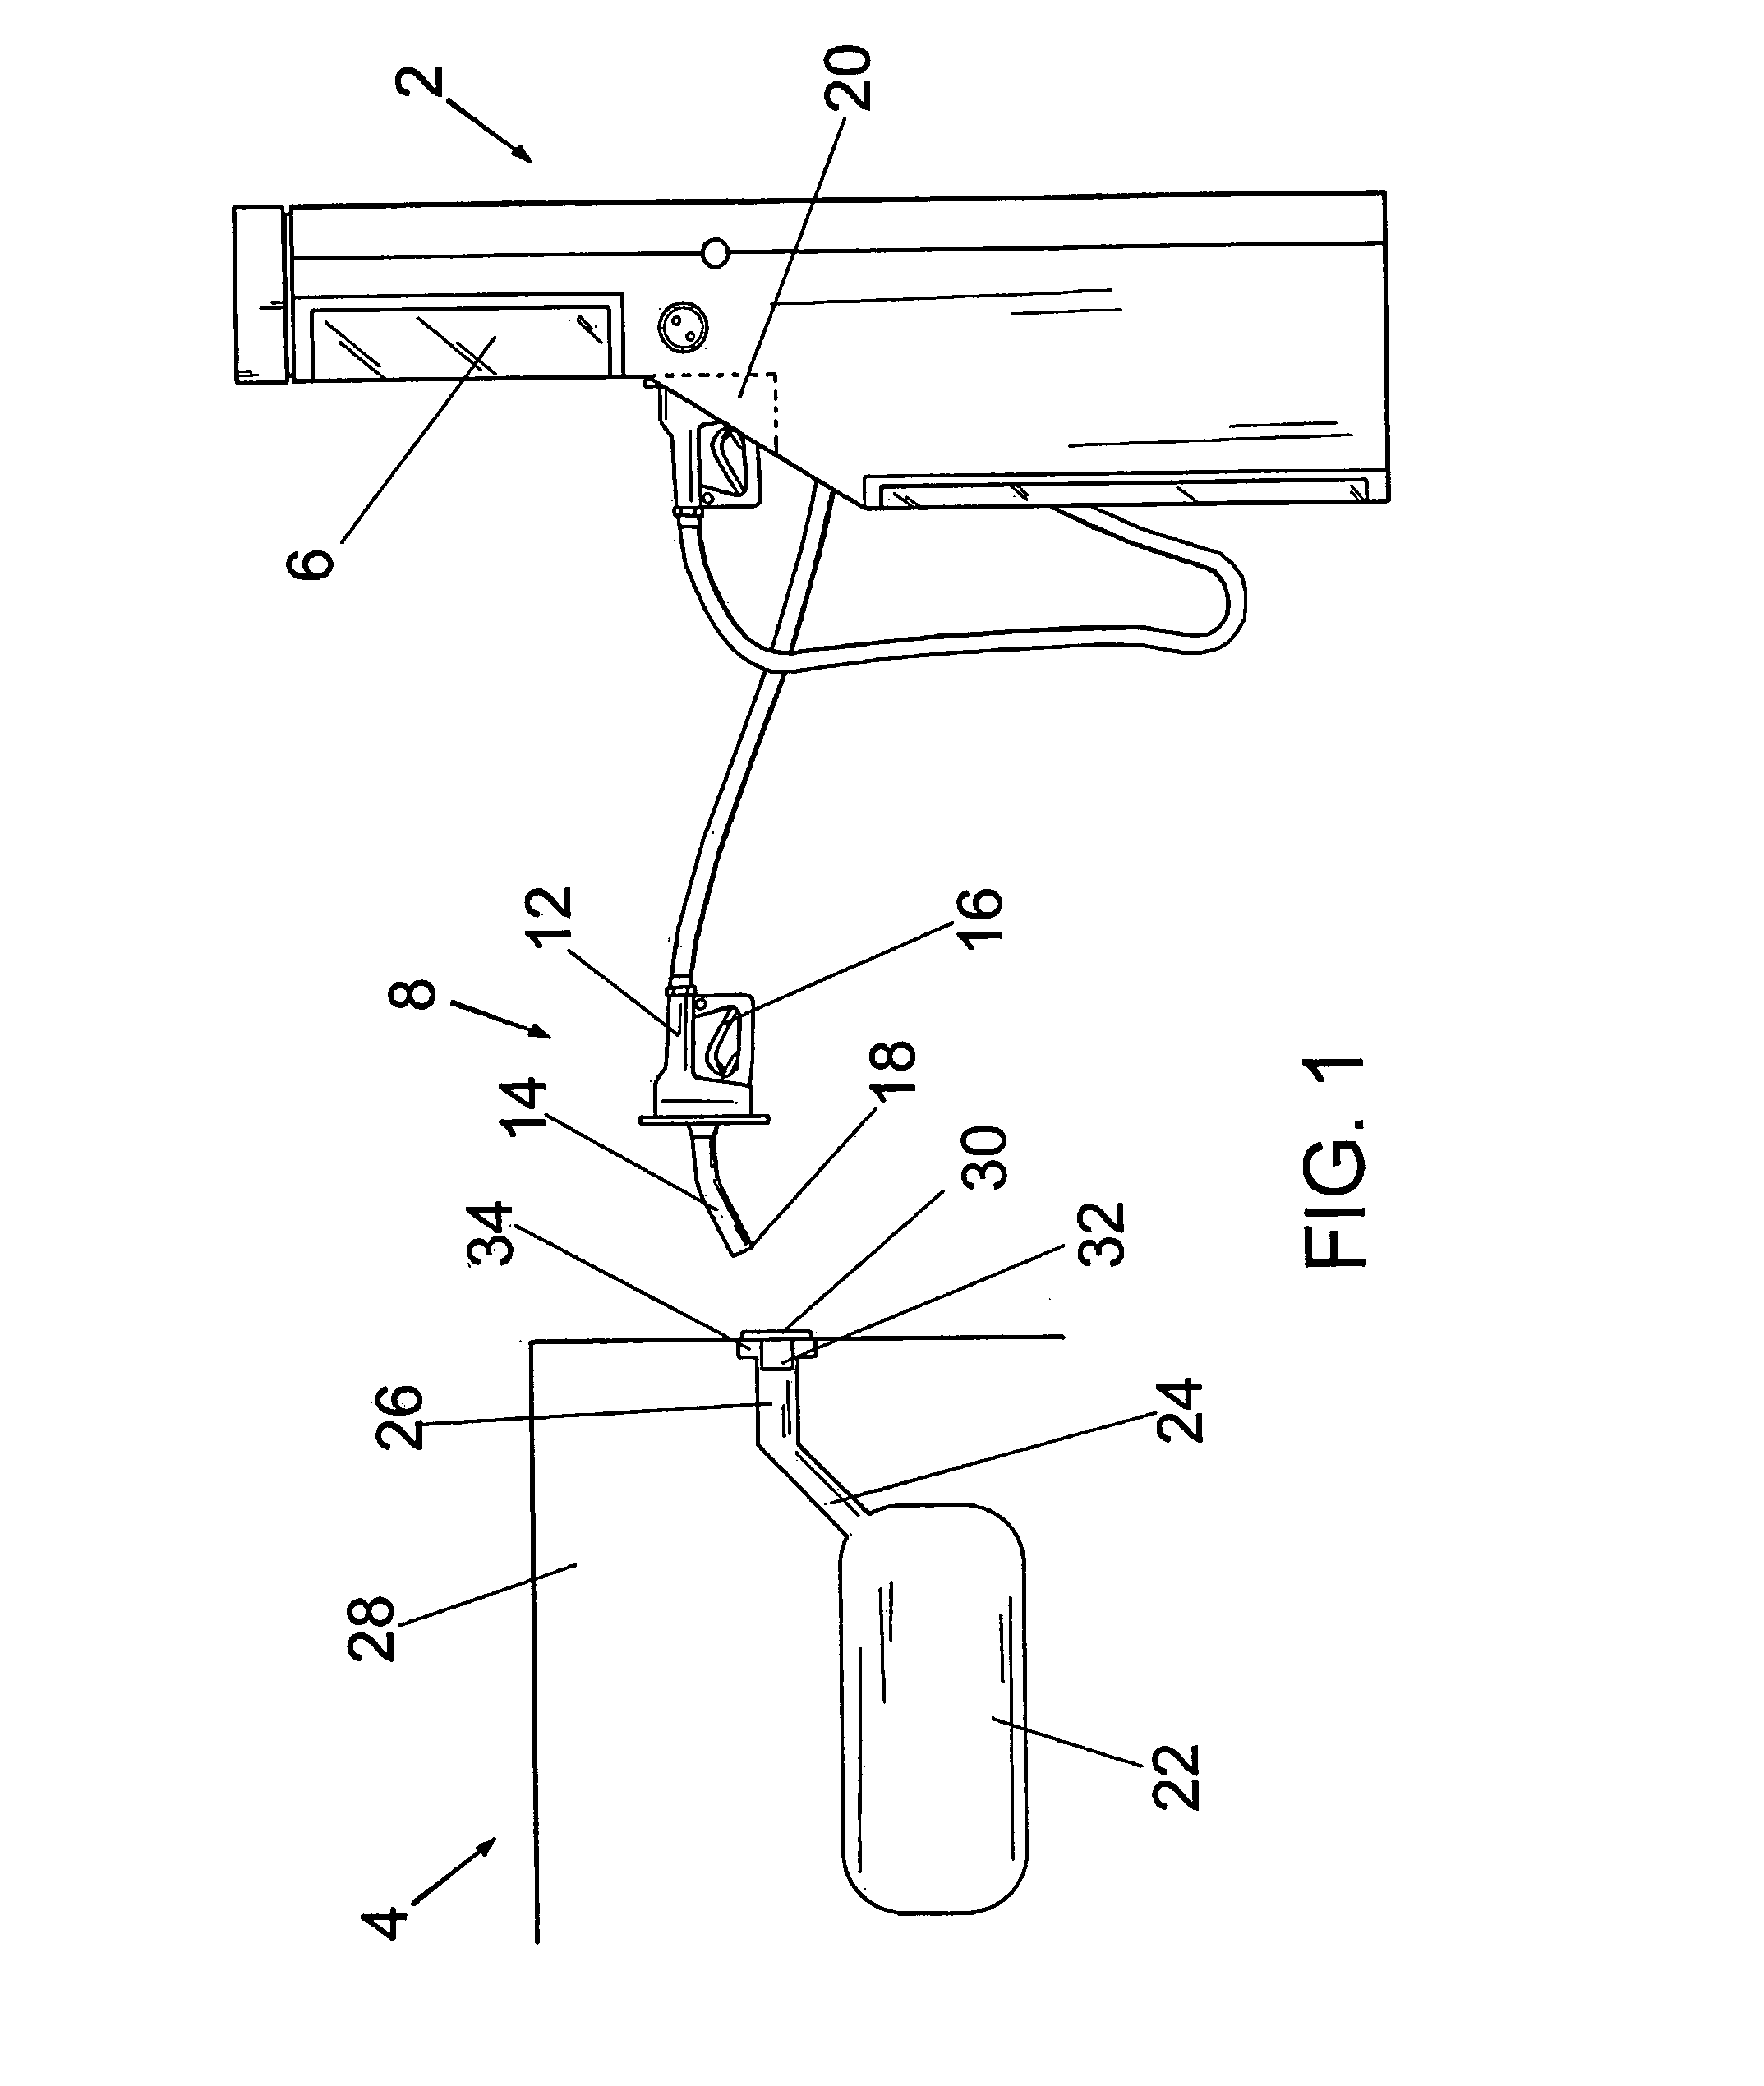 Apparatus and Method for Transferring Data Between a Fuel Providing Means and a Vehicle for the Prevention of Misfuelling